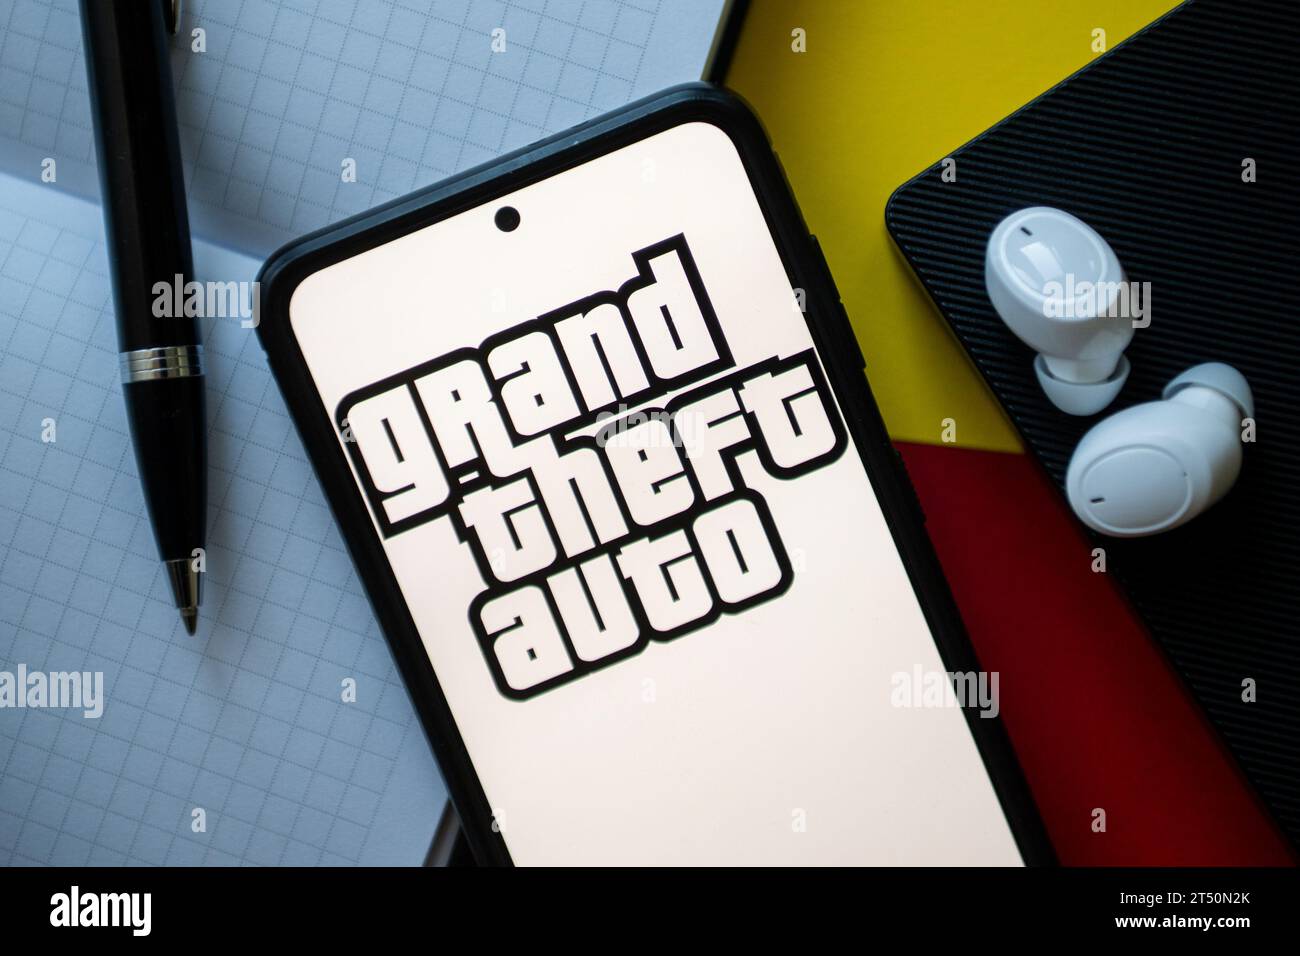 Grand Theft Auto, San Andreas Video Game for the PlayStation, Launched in  2004 as the seventh title in the series - 5 September 2006 Stock Photo -  Alamy